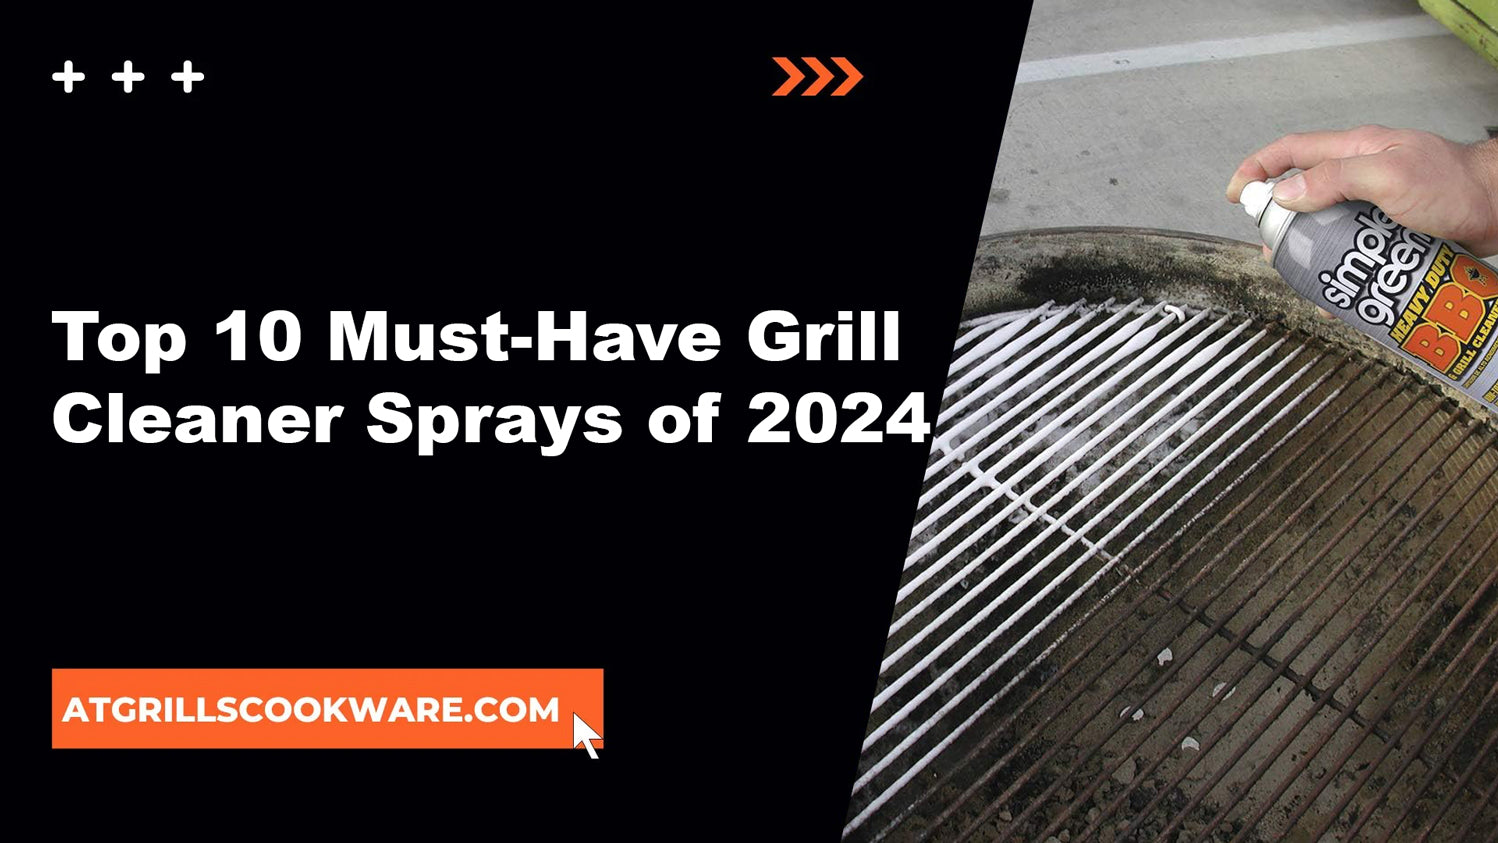 Top 10 Must-Have Grill Cleaner Sprays of 2024